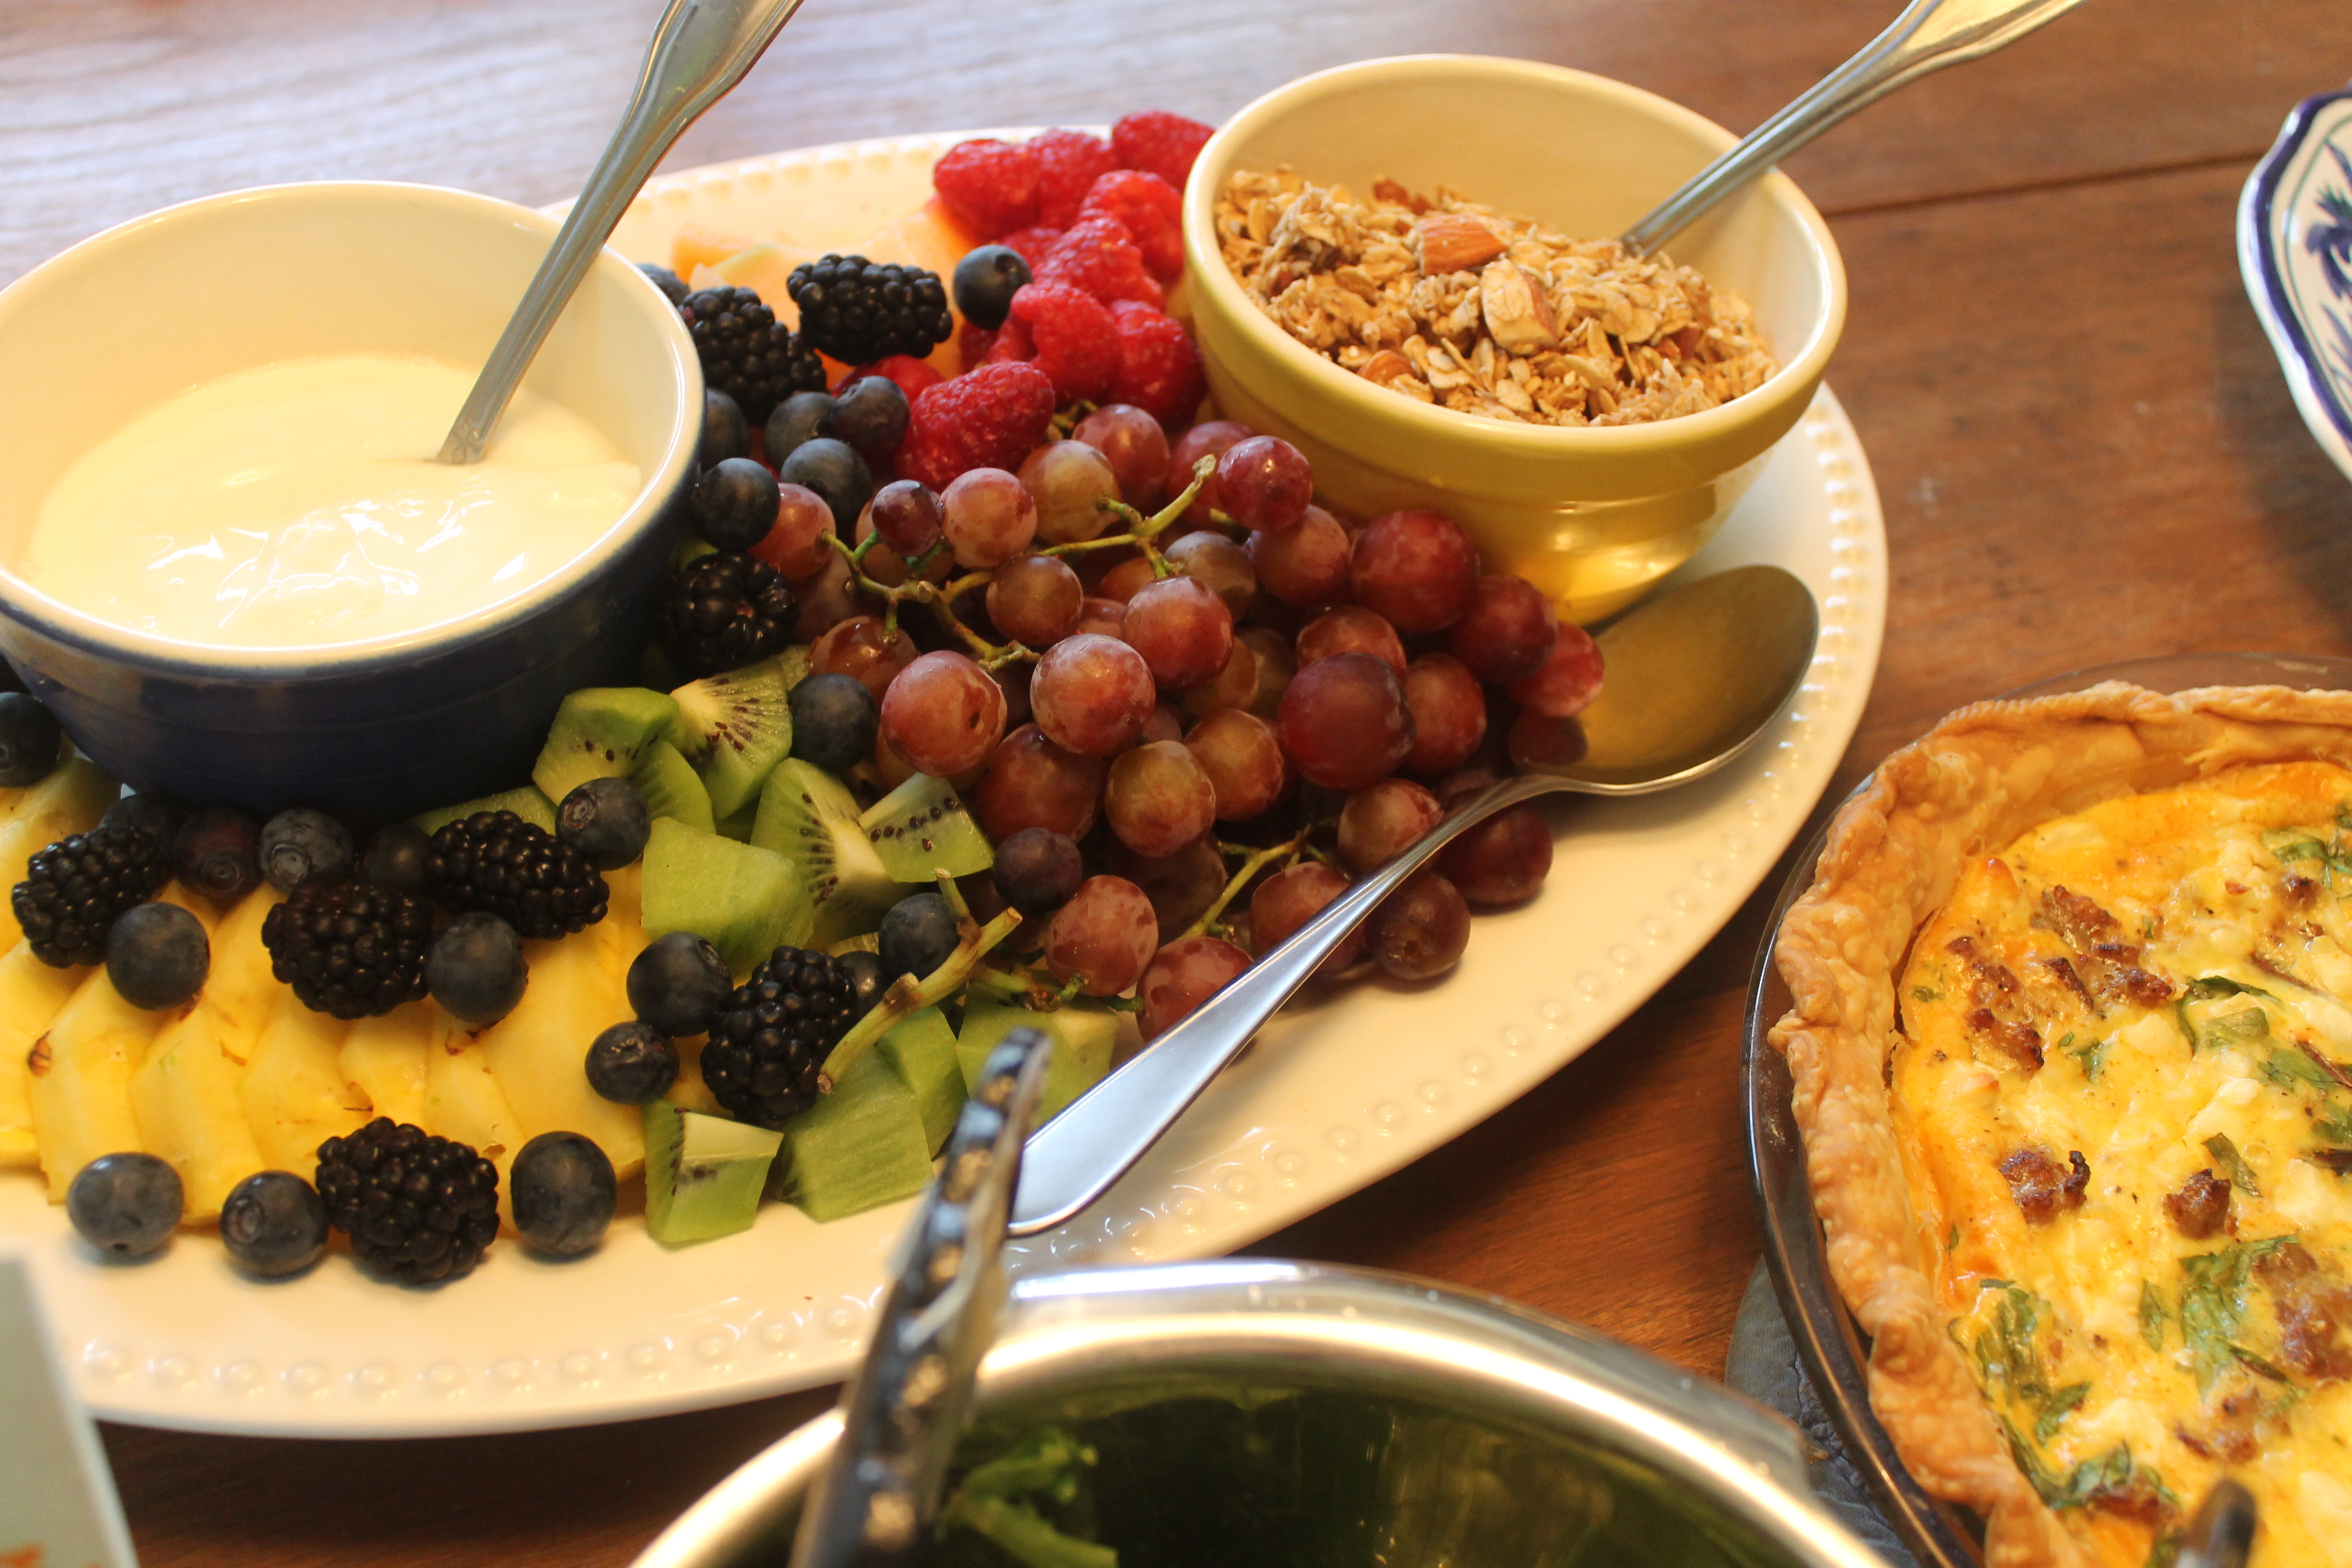 Spinach and Sausage Quiche, Fruit with Yogurt and Granola